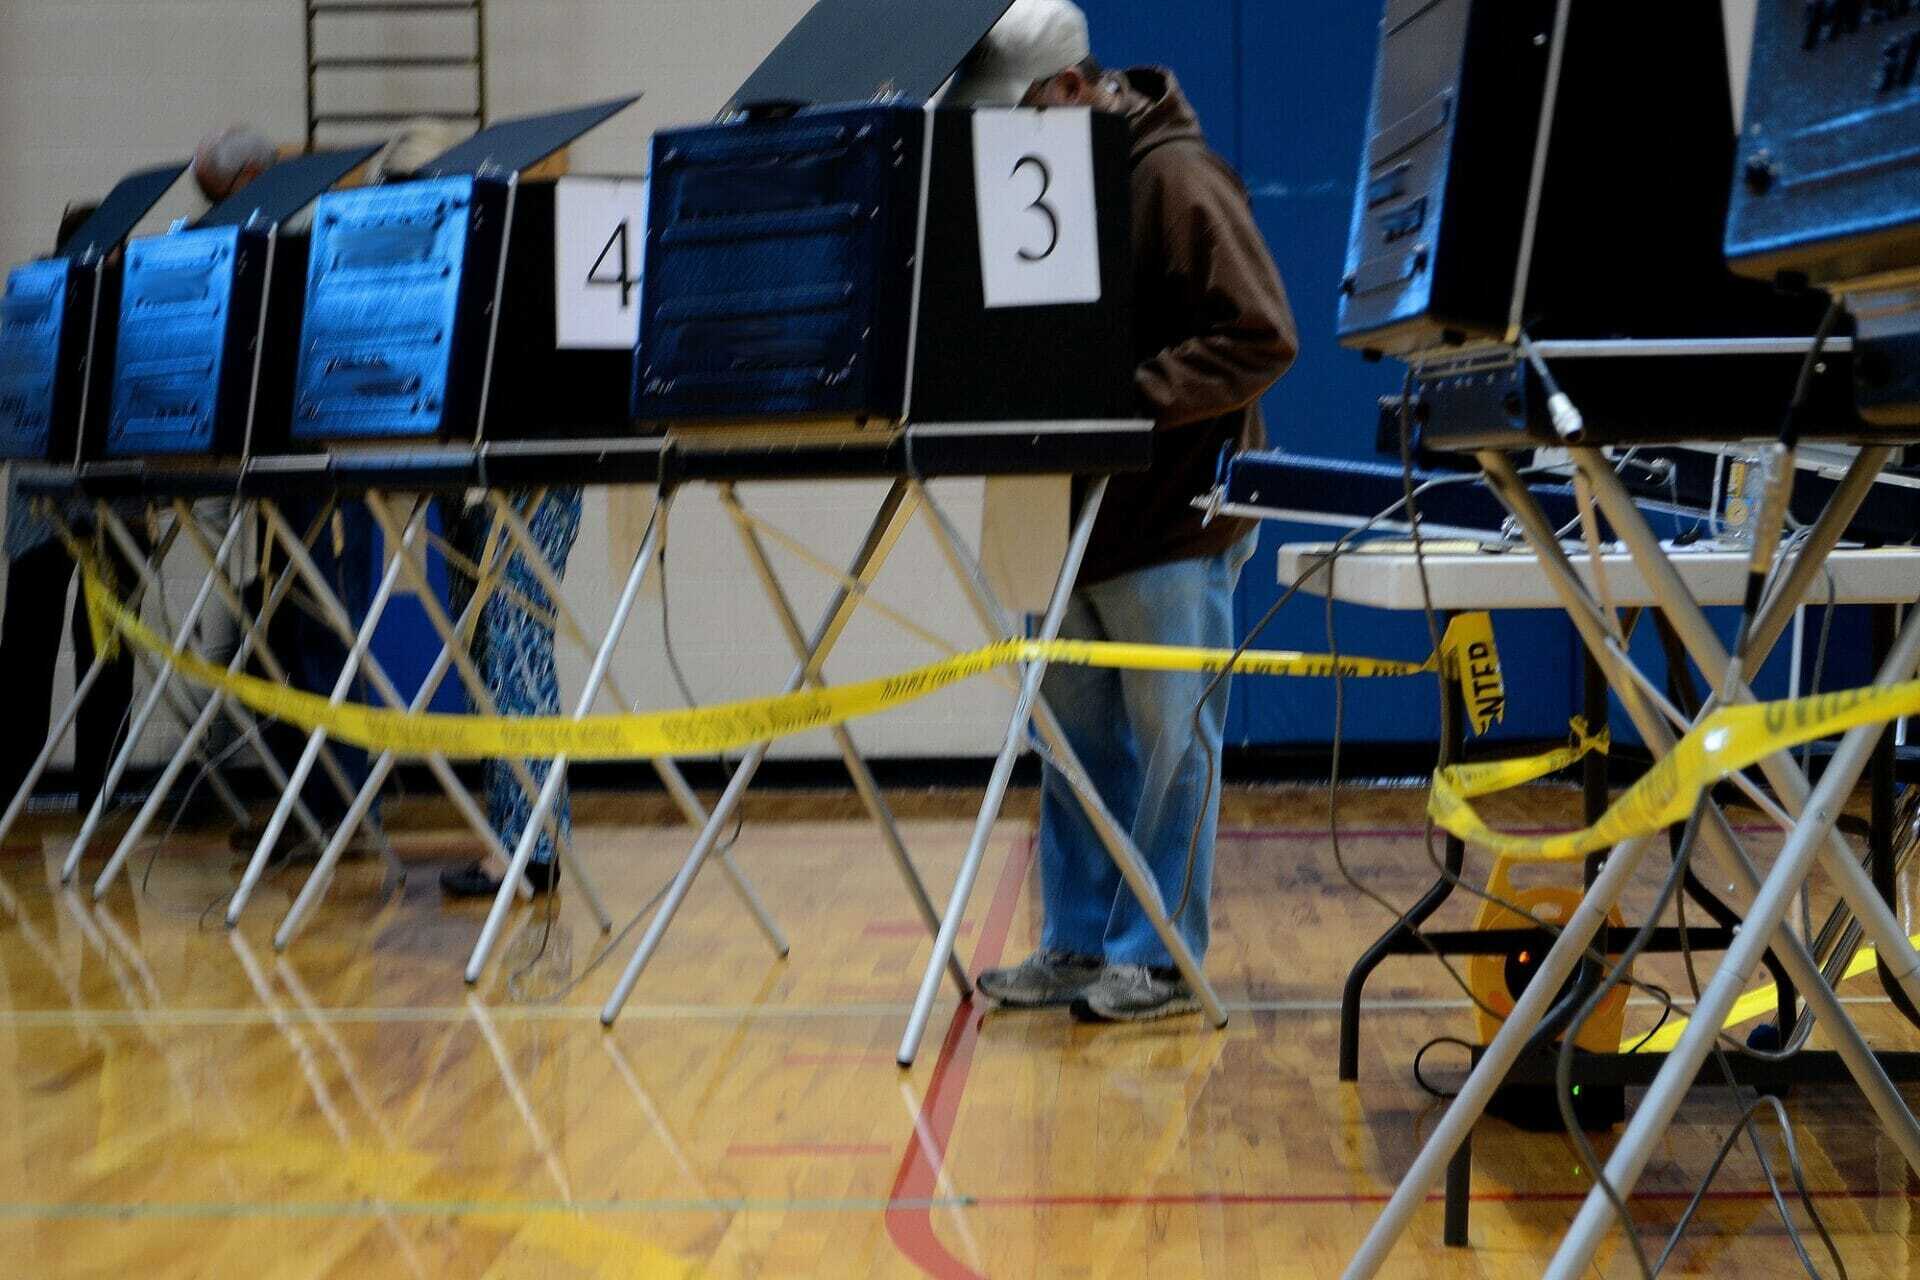 people using voting booths to vote in an election